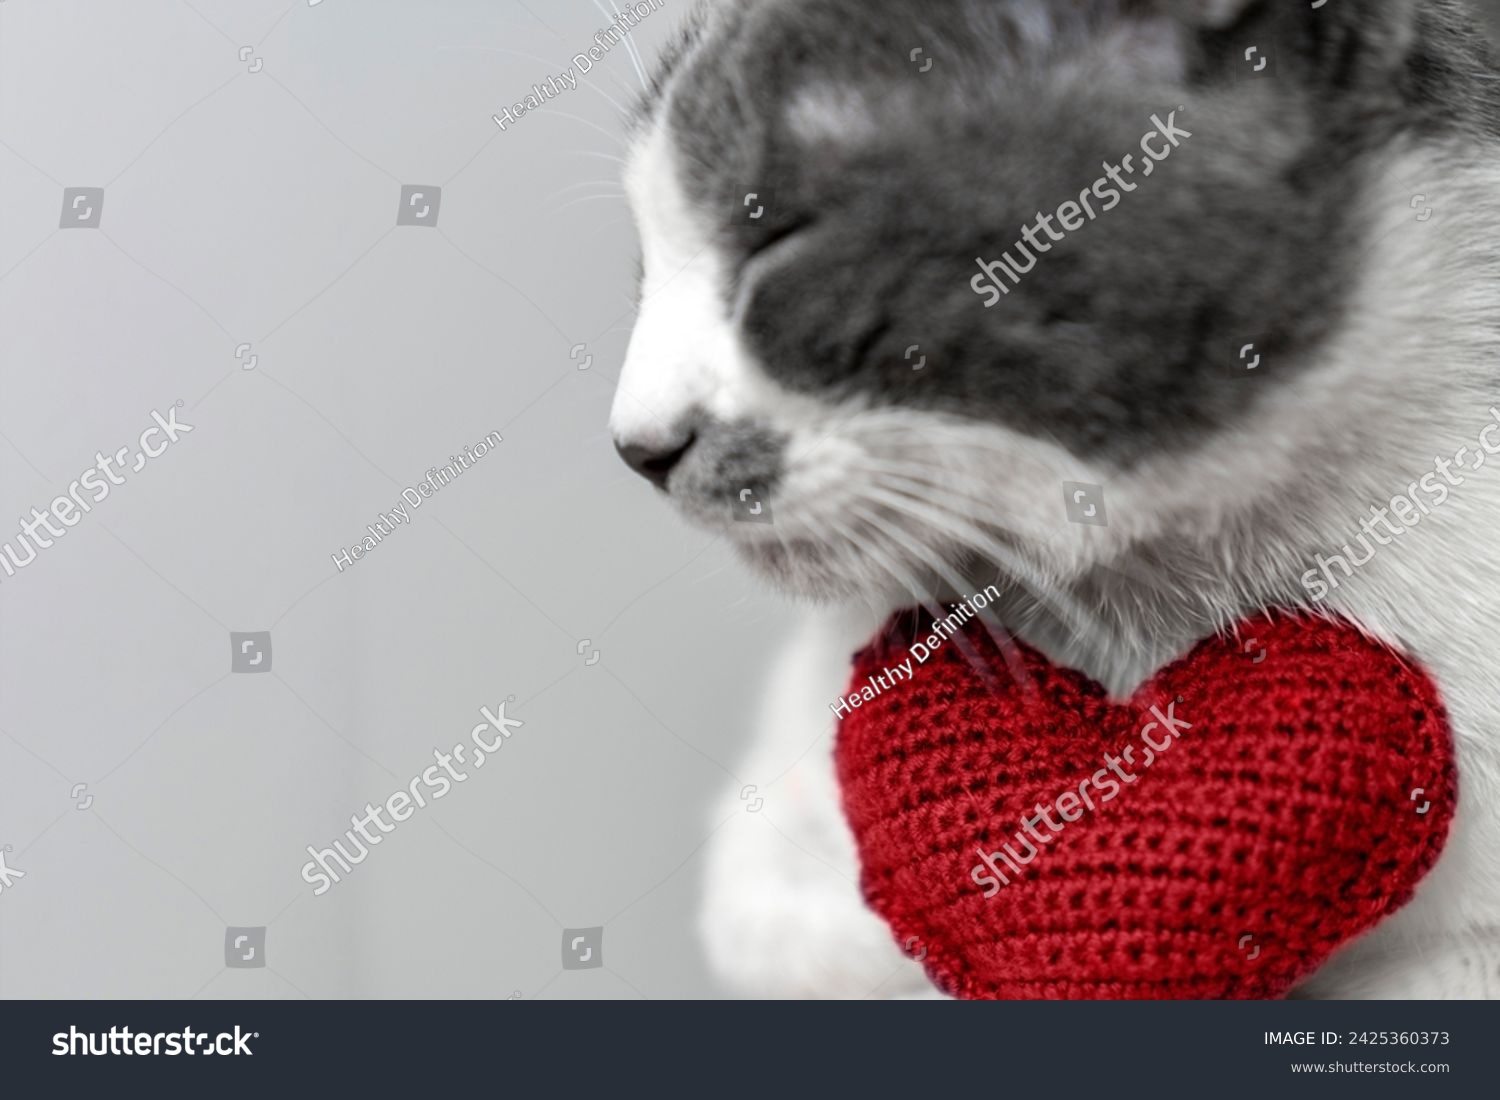 Red knitted heart in the paws of a cat. a gray and black fluffy cat for Valentine's Day or postcard. Textured background with a cat. copy space. valentine's day, lovers day, love concept #2425360373